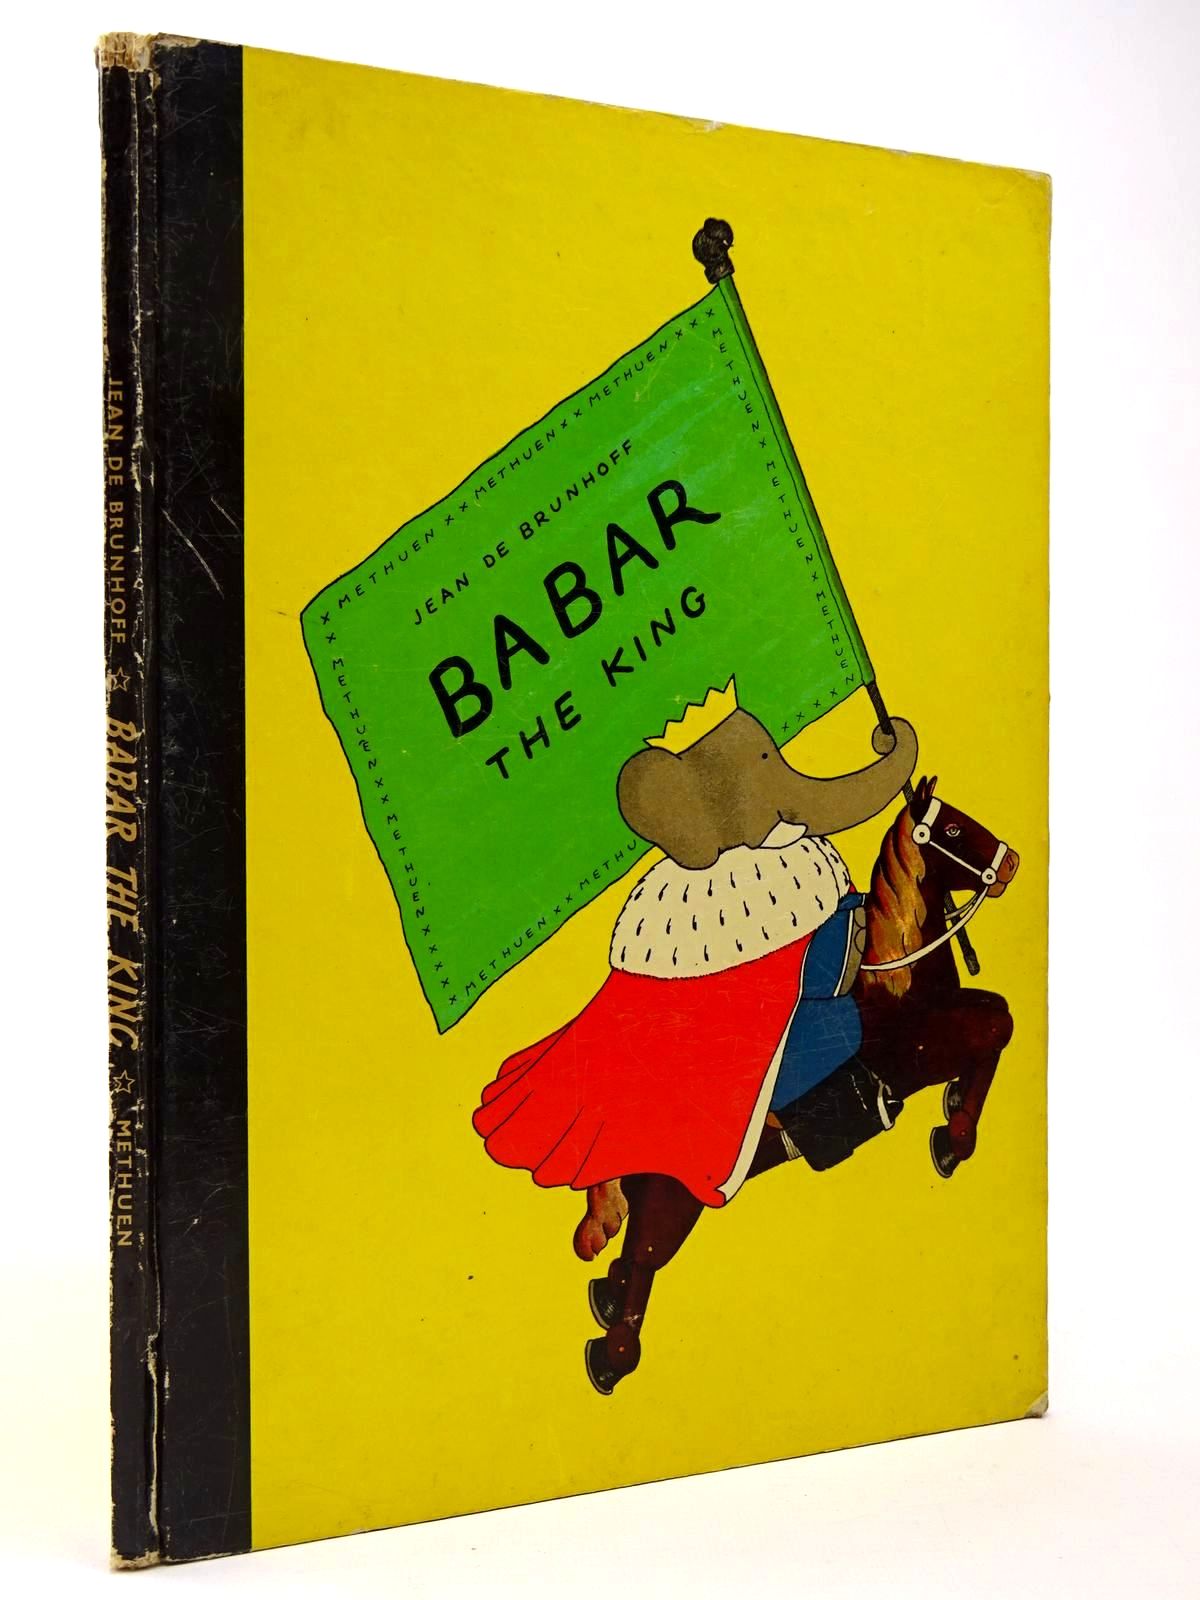 Photo of BABAR THE KING written by De Brunhoff, Jean published by Methuen & Co. Ltd. (STOCK CODE: 2129829)  for sale by Stella & Rose's Books